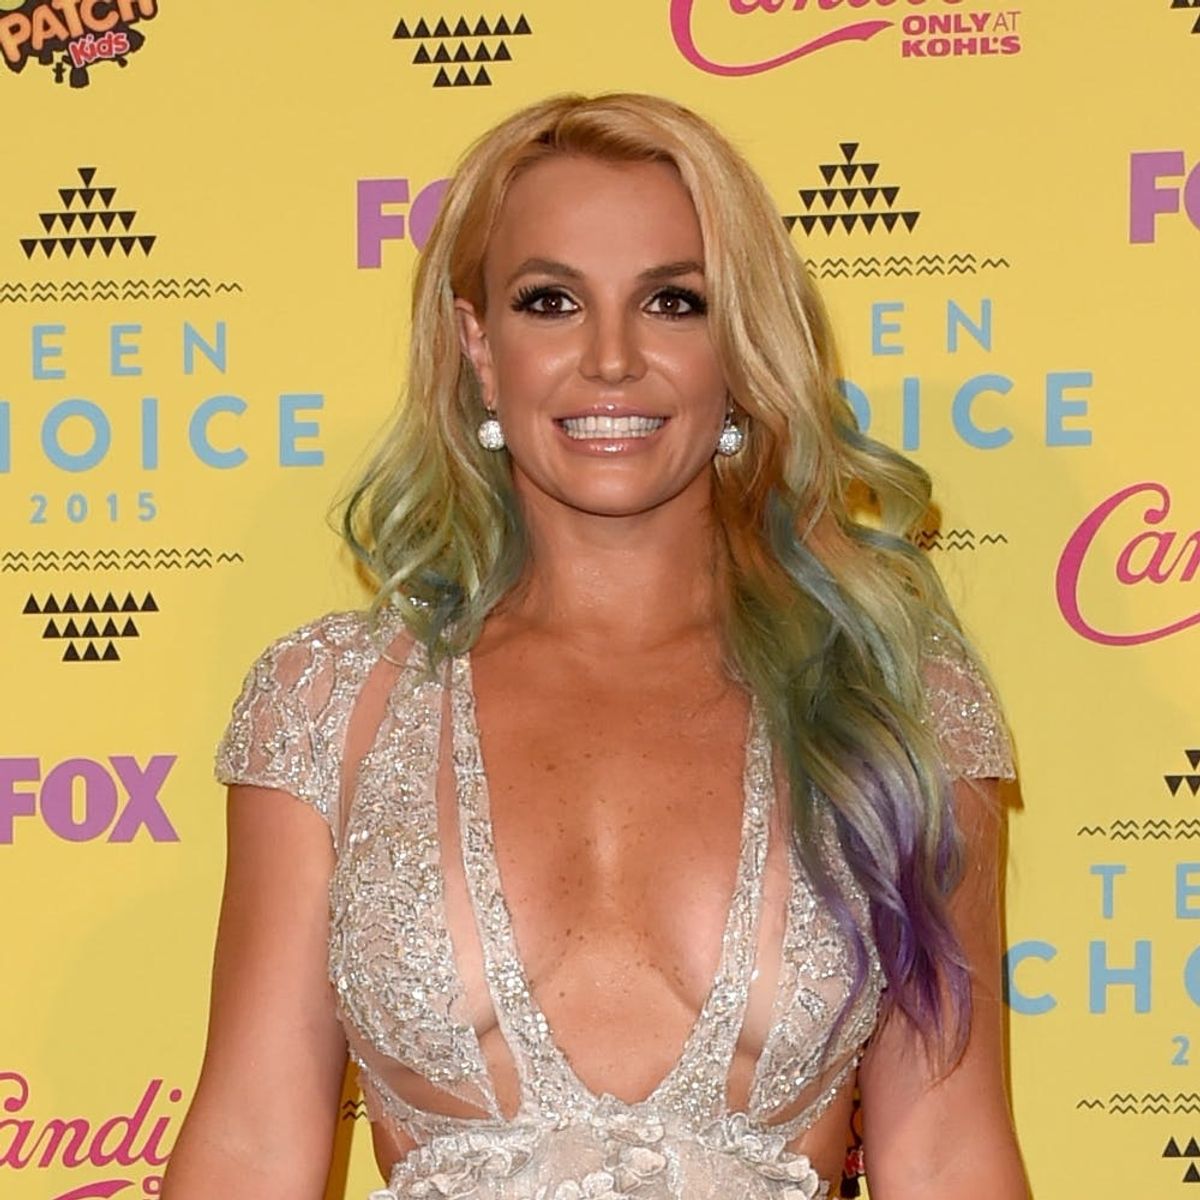 Britney Spears Reveals Her Go-To Workouts and Her Cheat Day Indulgences